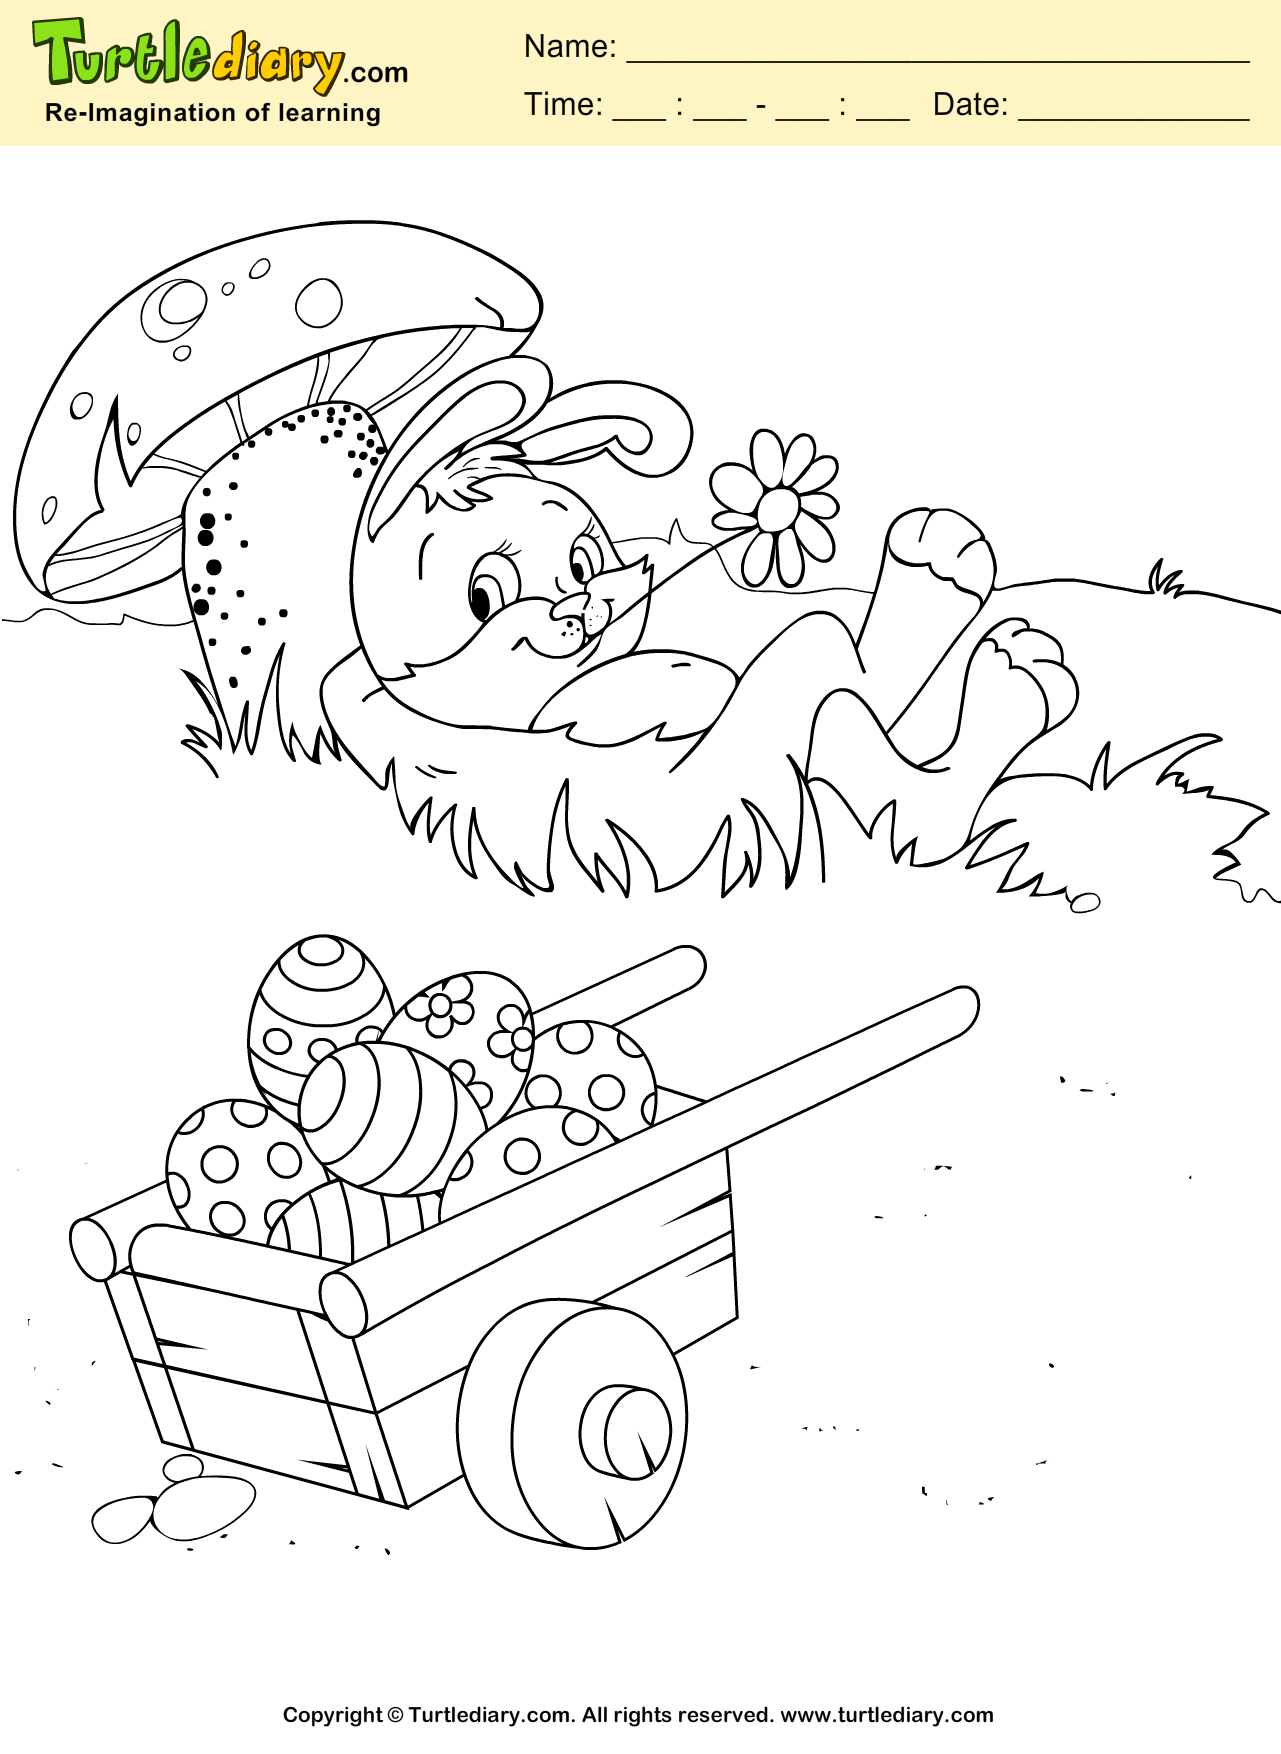 Easter Rabbit Coloring Page